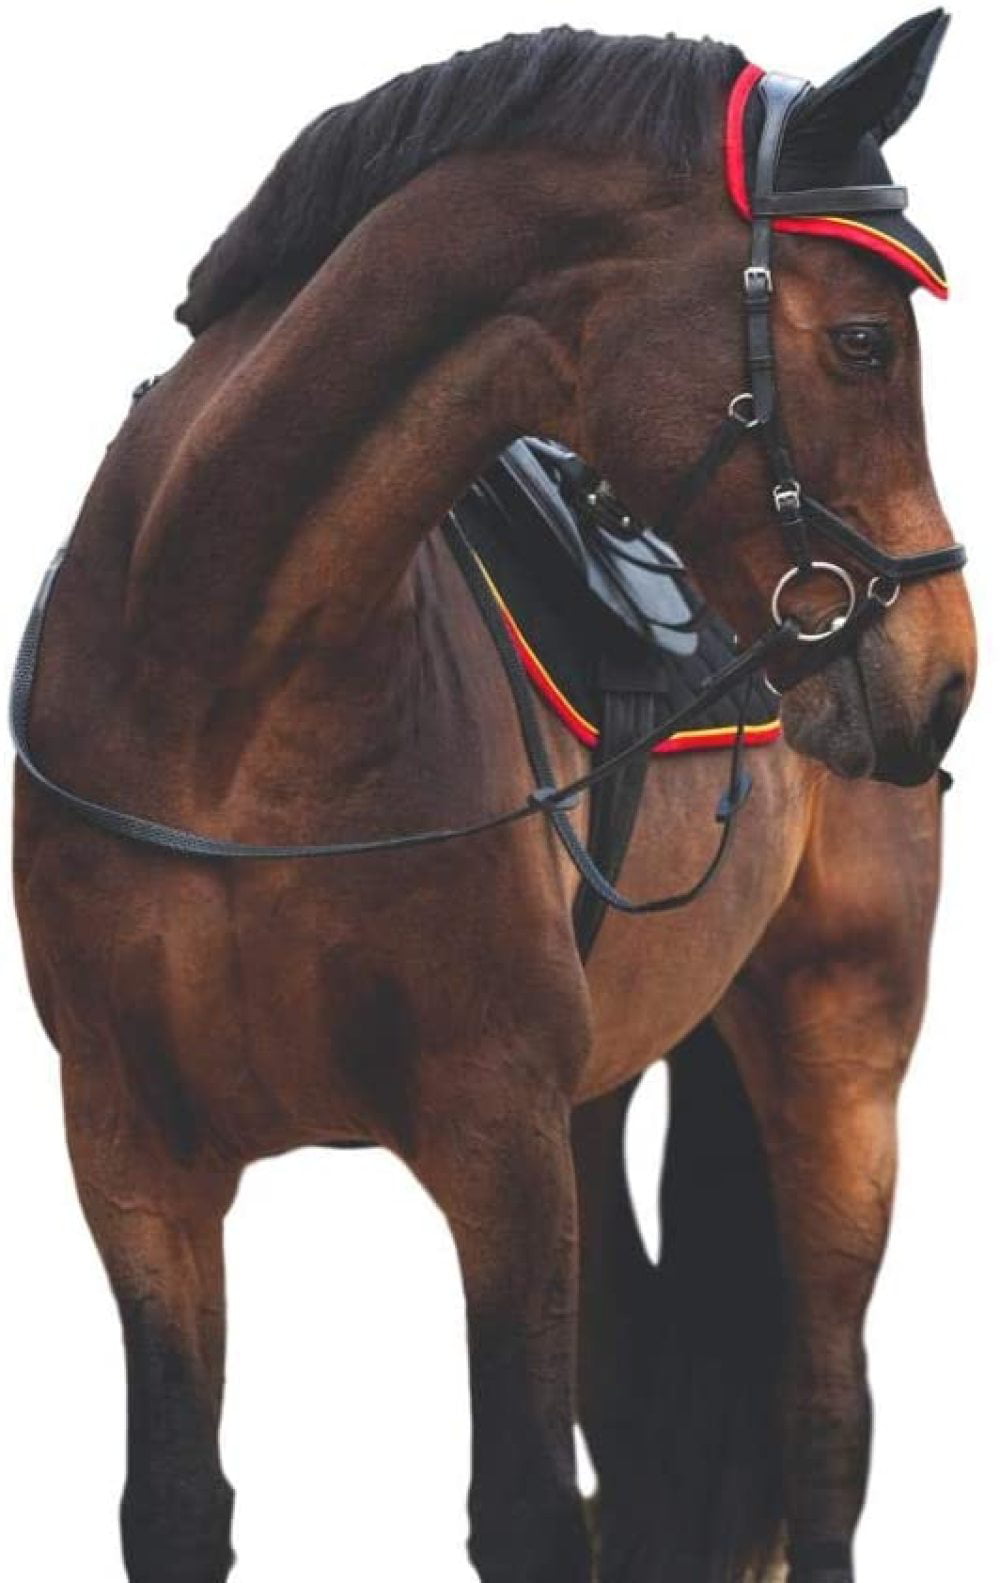 Horseware Rambo Air Tech Ear Net with Lycra Stretch Ears and Airmesh Outer 